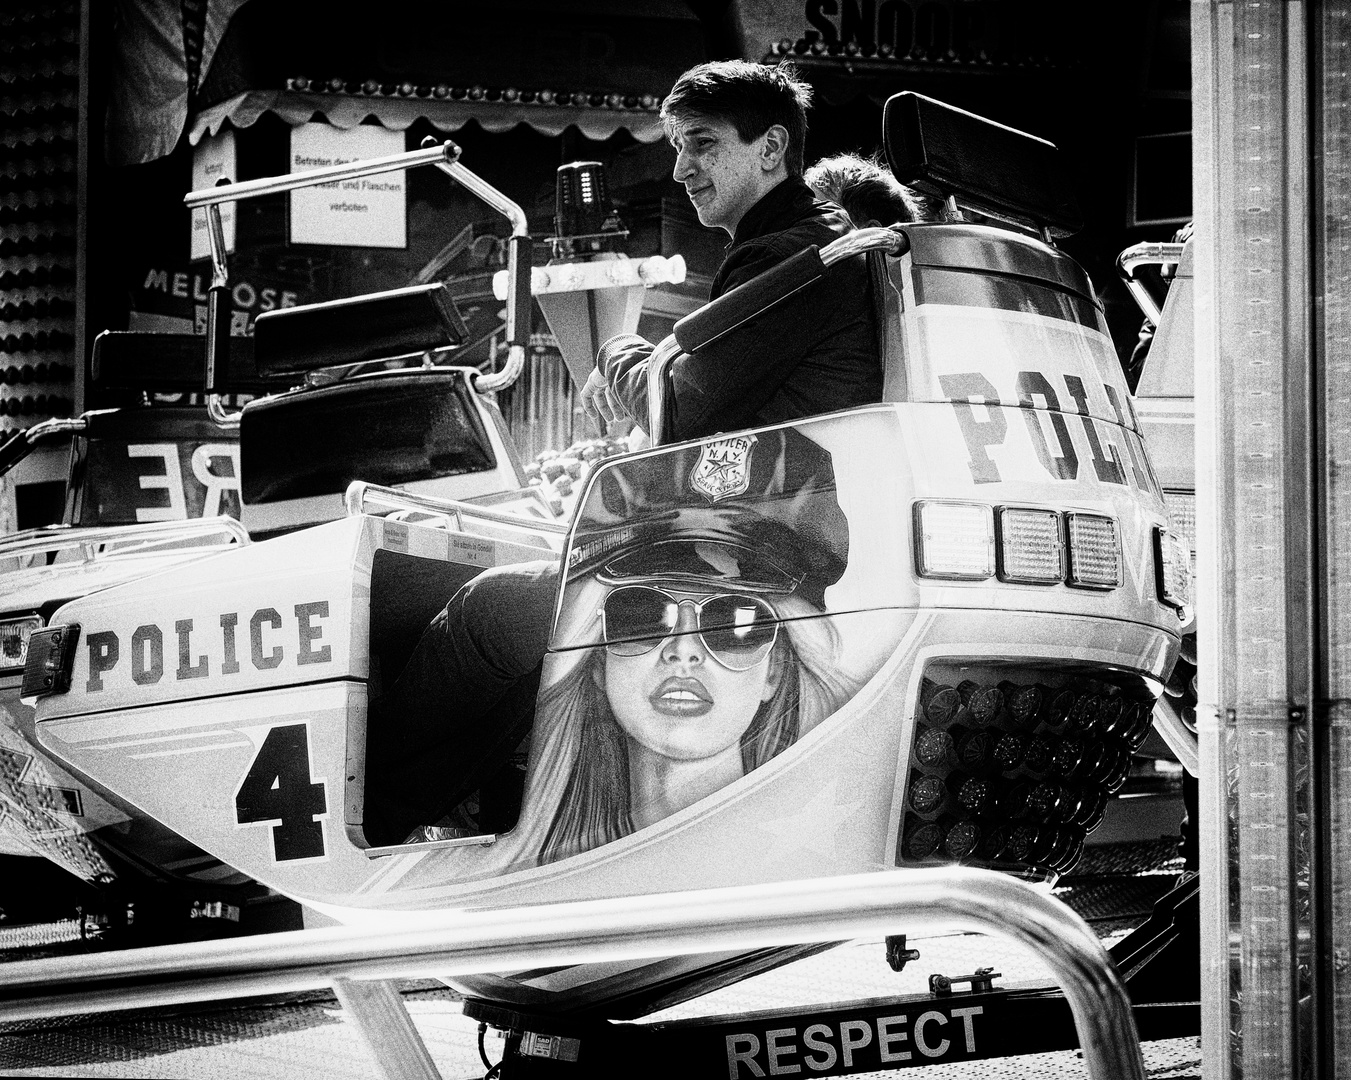 police - respect ...